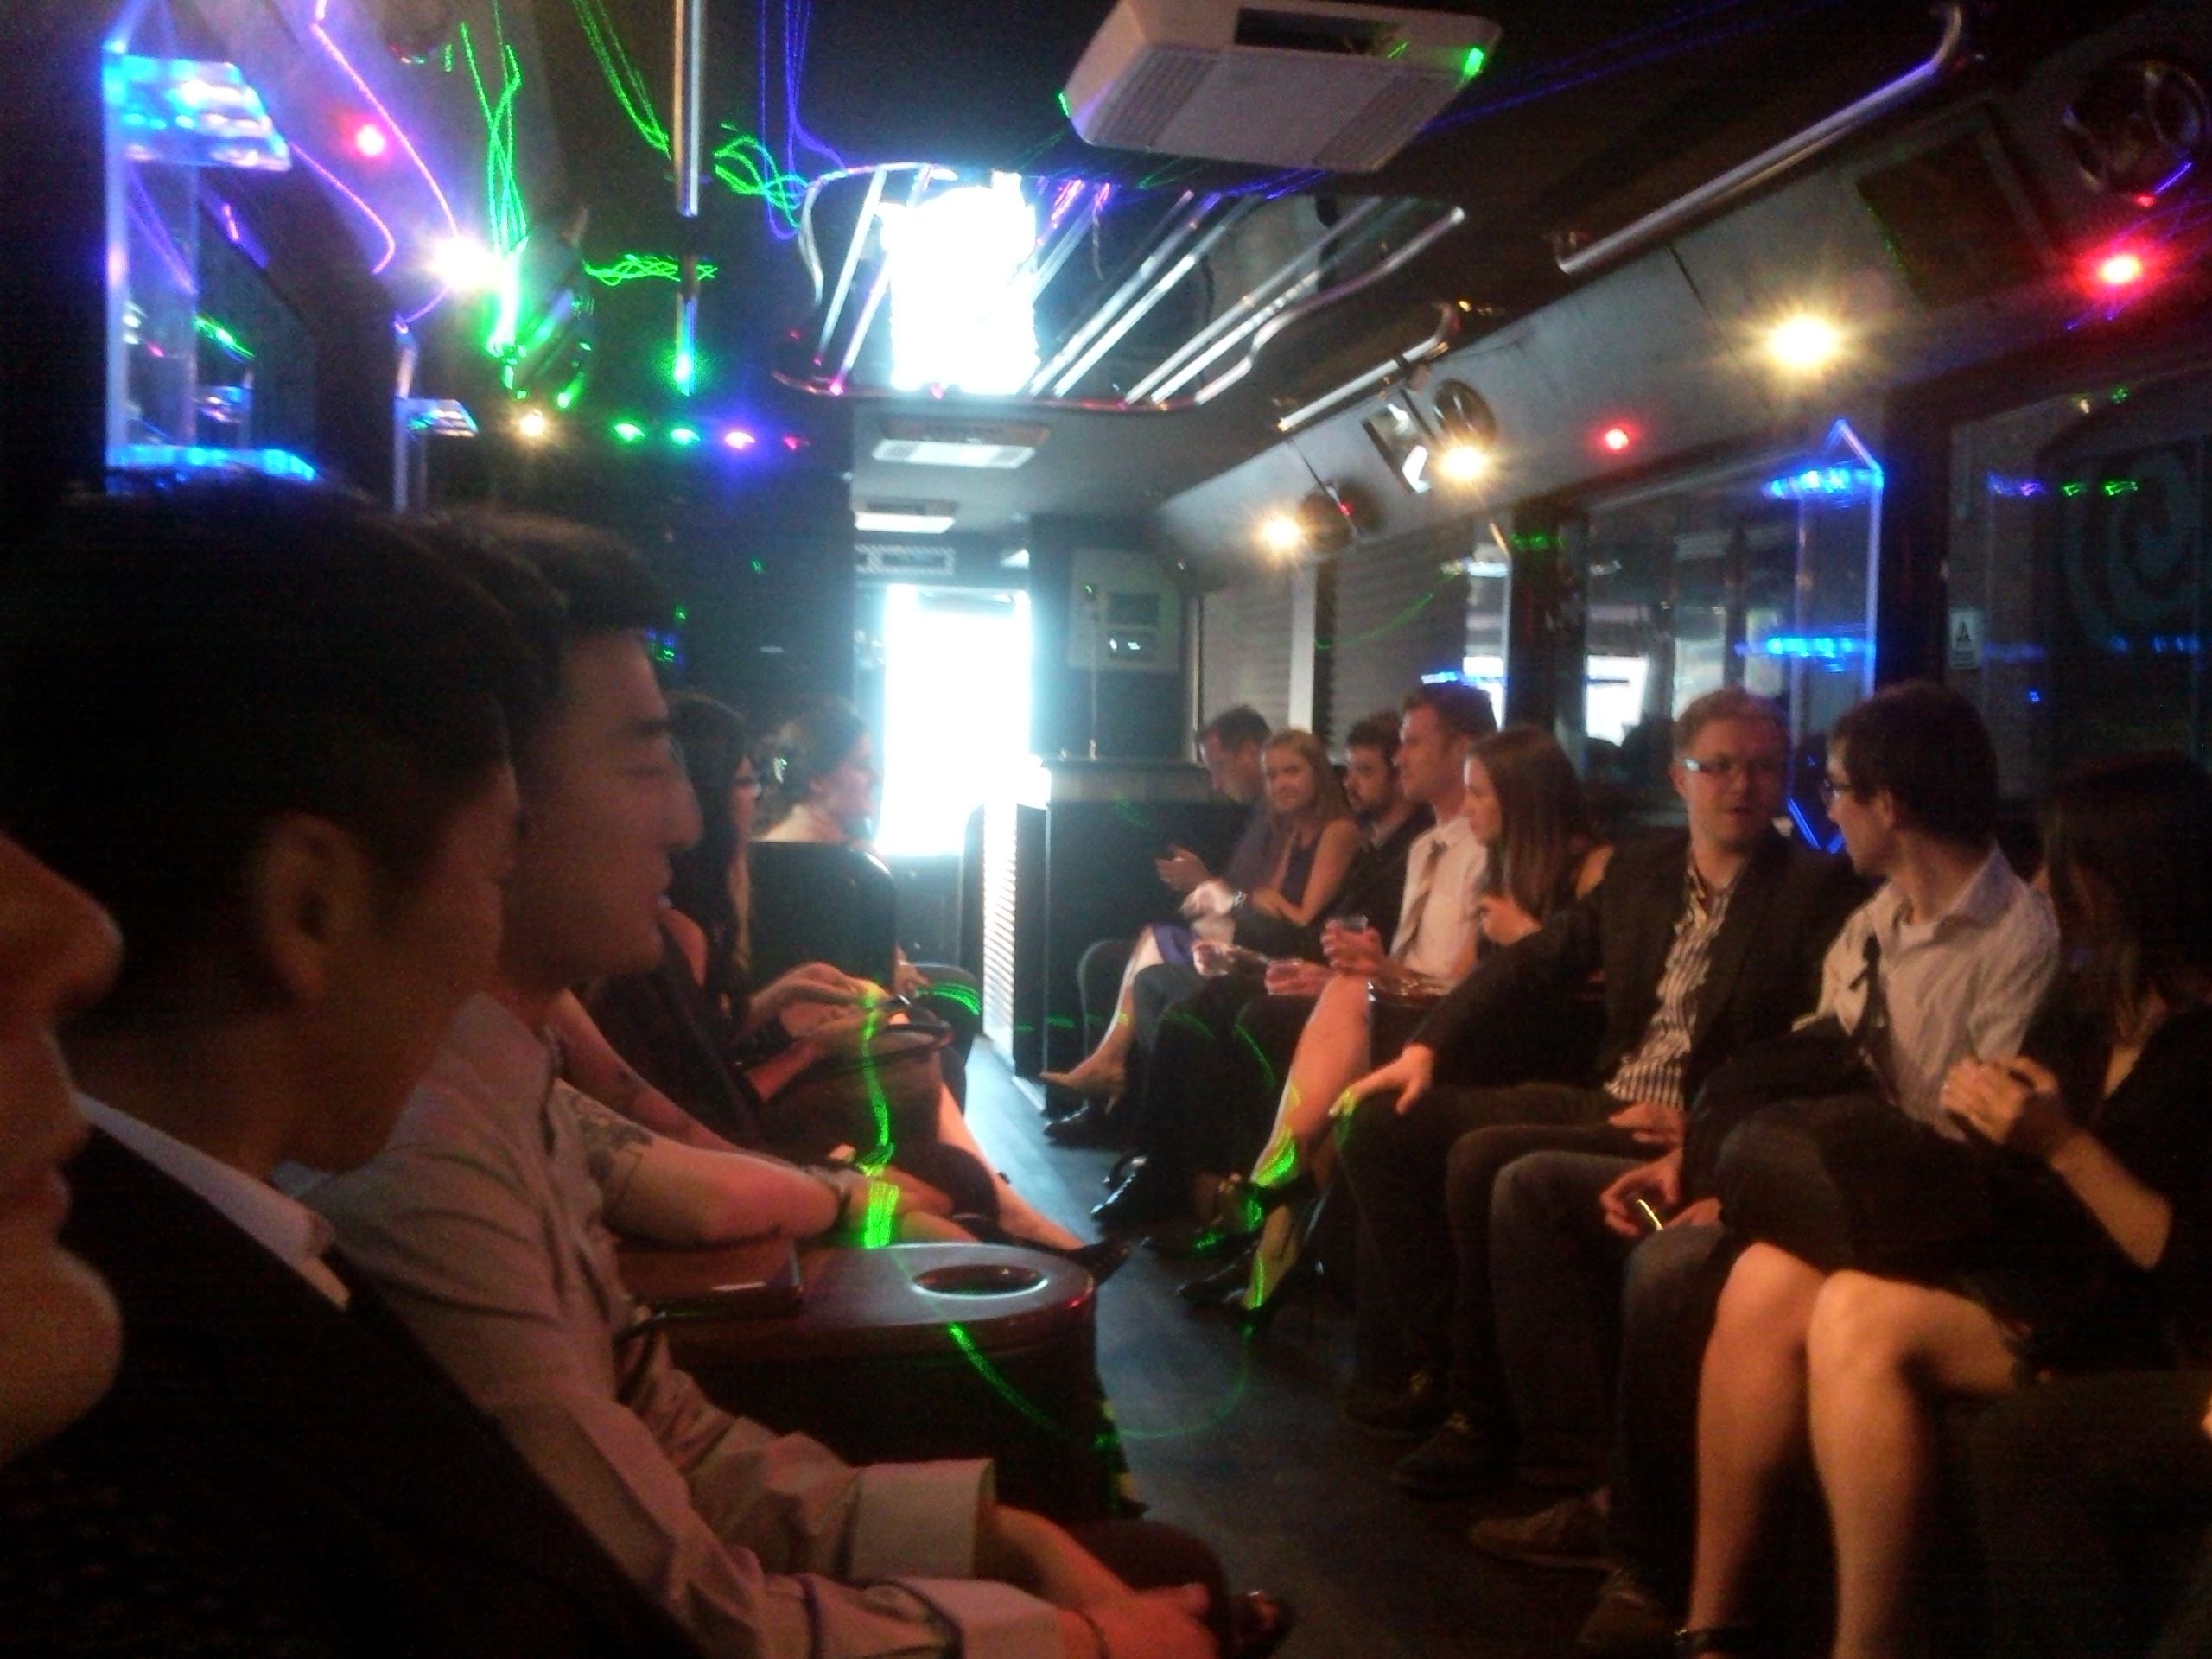 On the party bus - Evgeny and Renat chatting while we wait to get going